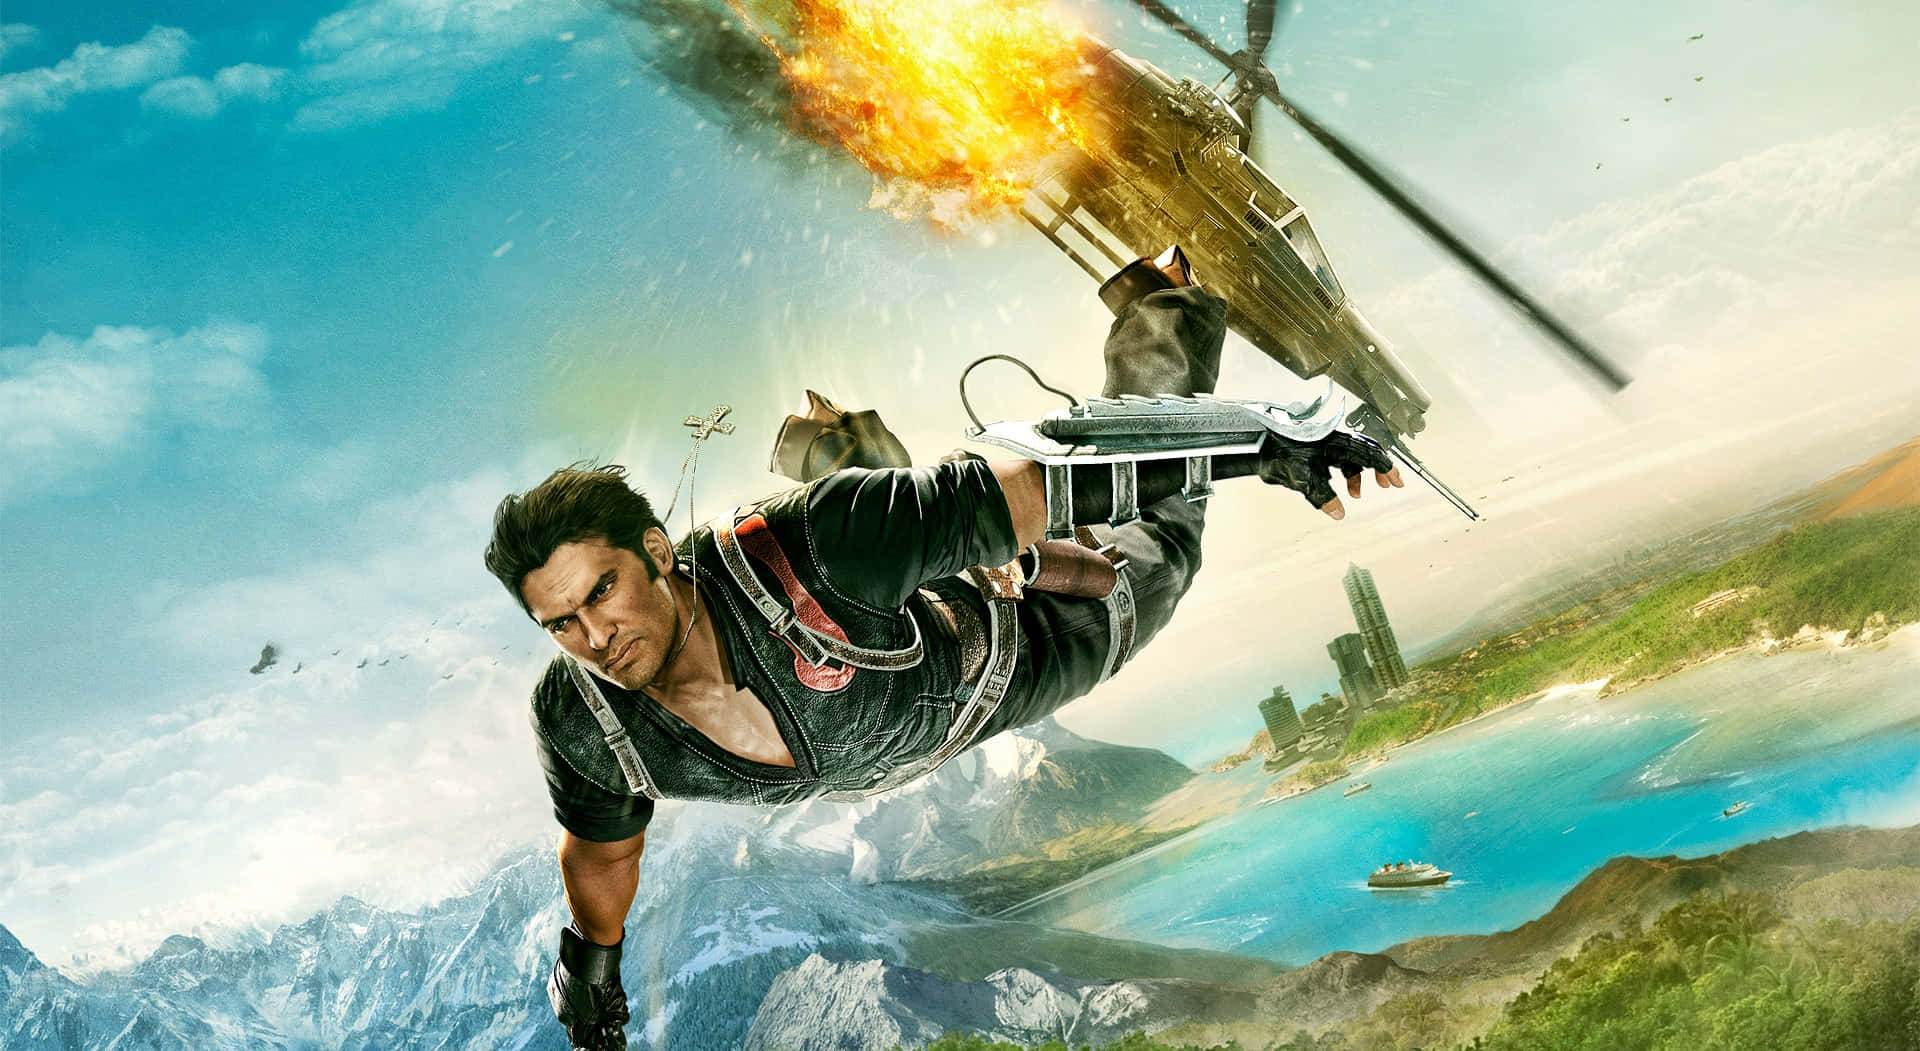 Experience an explosive adventure in the open world of Just Cause 1 Wallpaper